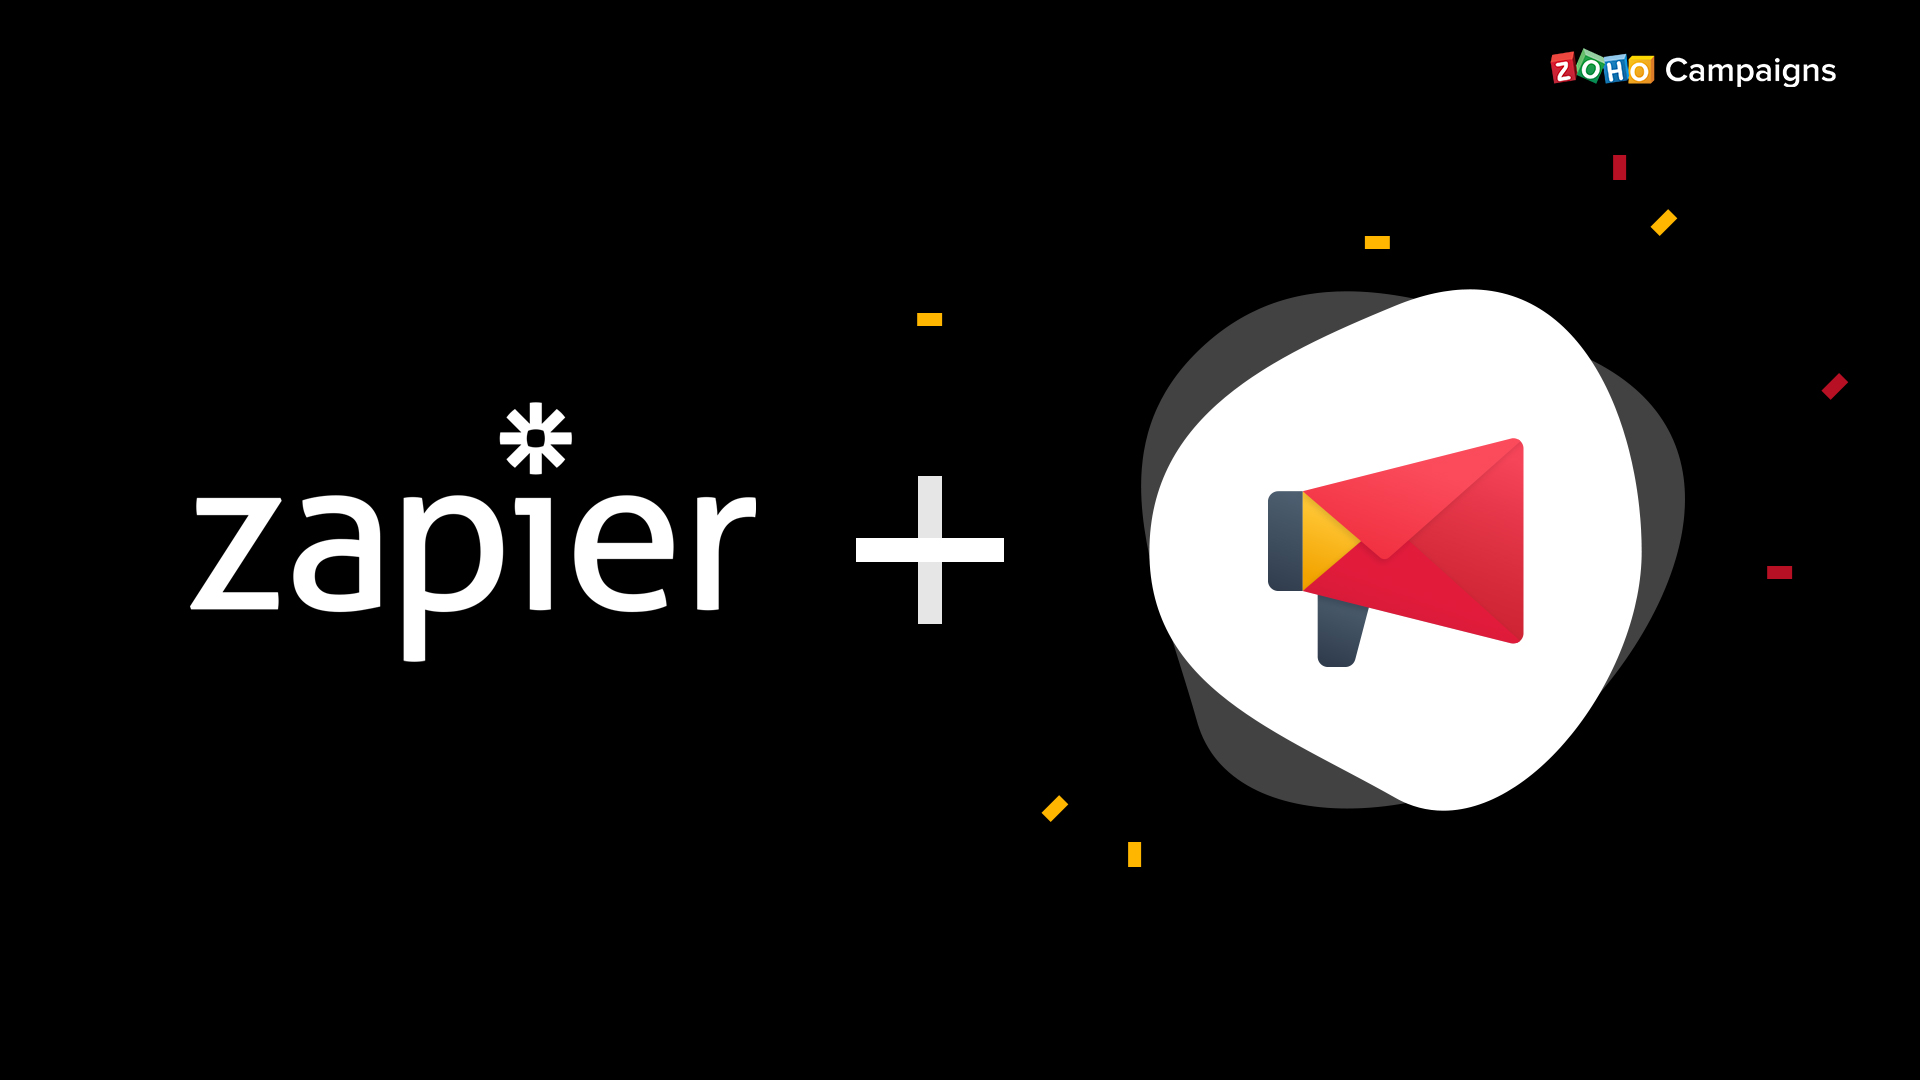 Announcing Zoho Campaigns' integration with Zapier 